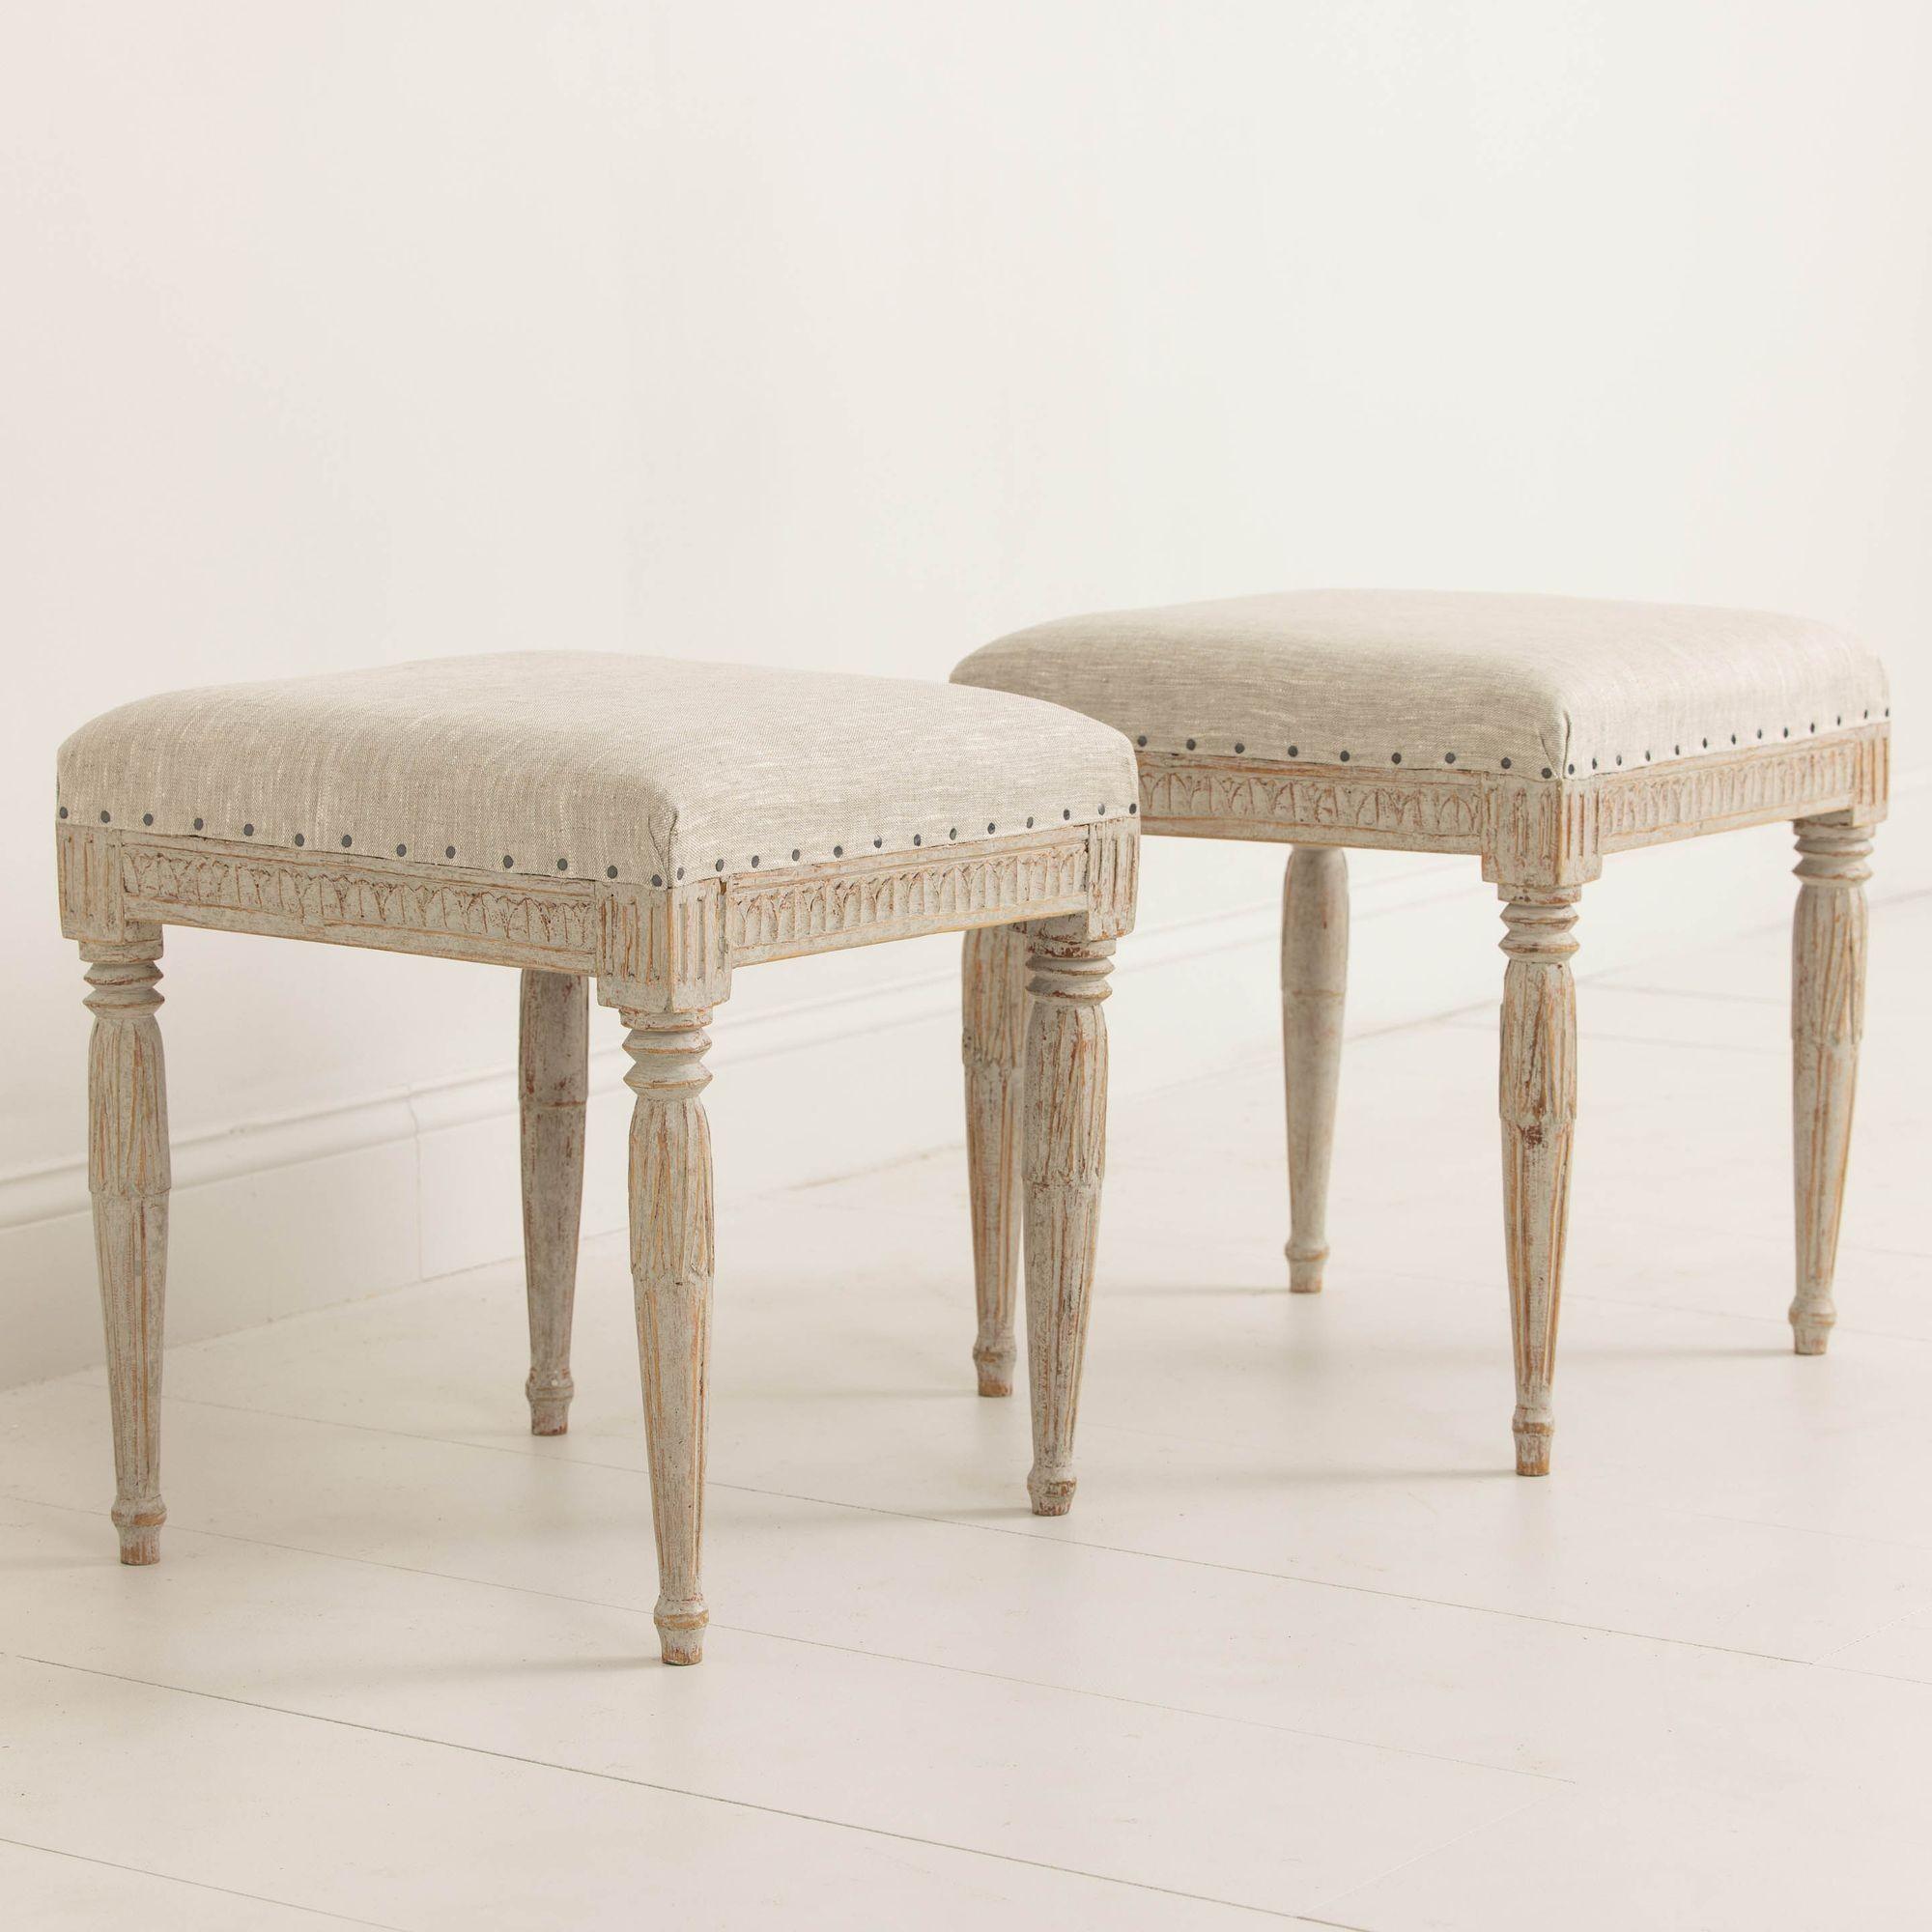 Beautifully carved pair of Swedish benches from the late Gustavian period, newly upholstered in linen with nailhead trim, circa 1830. Signed by Johannes Ericsson, 1803-1865, a chair maker in Knipered, a village in Lindome outside Göteborg. The